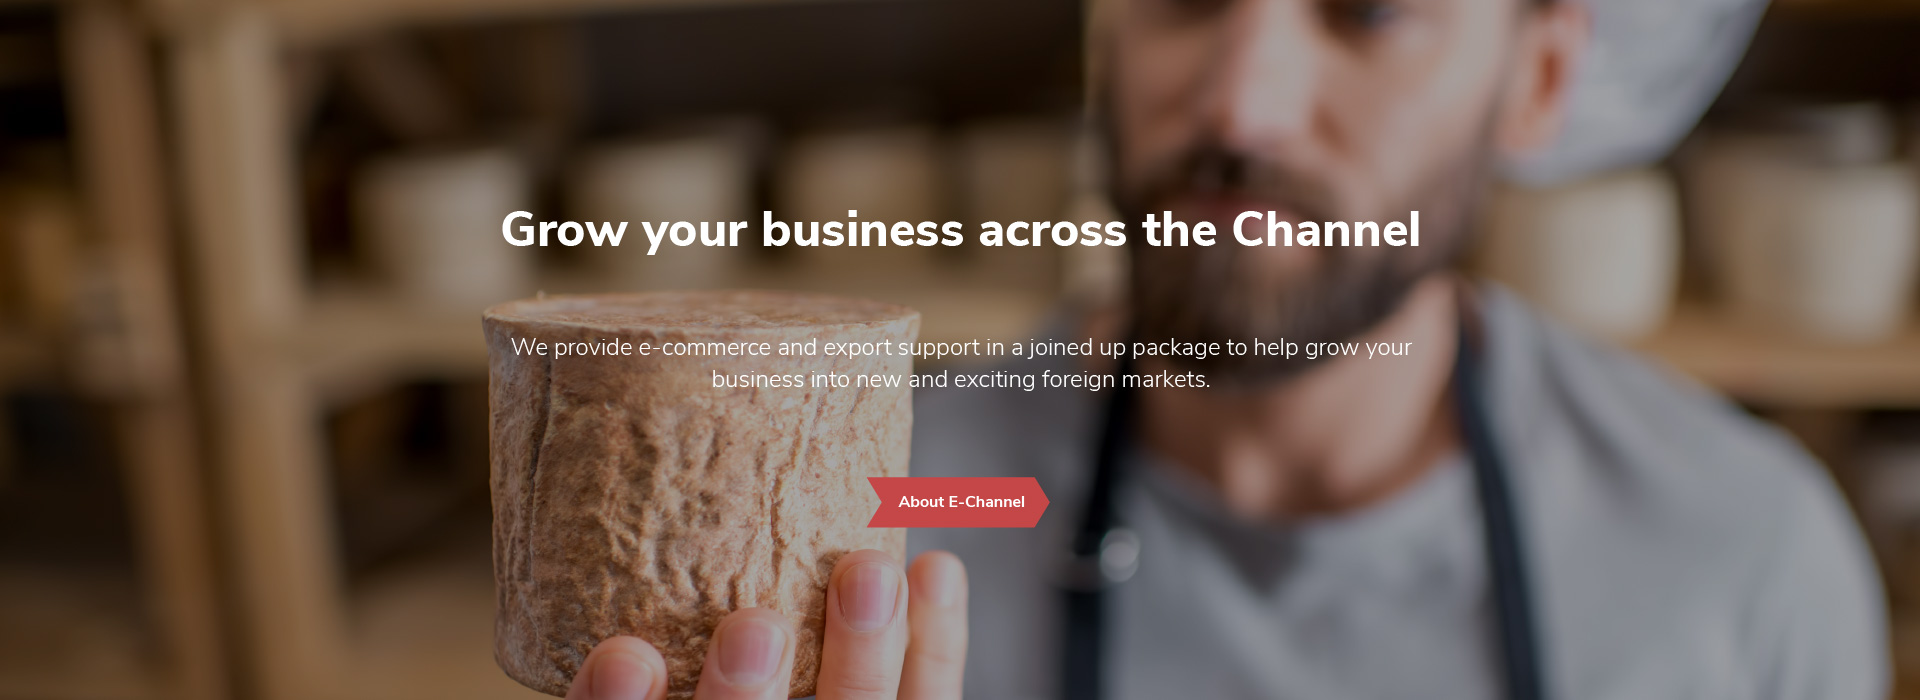 Grow your business across the Channel